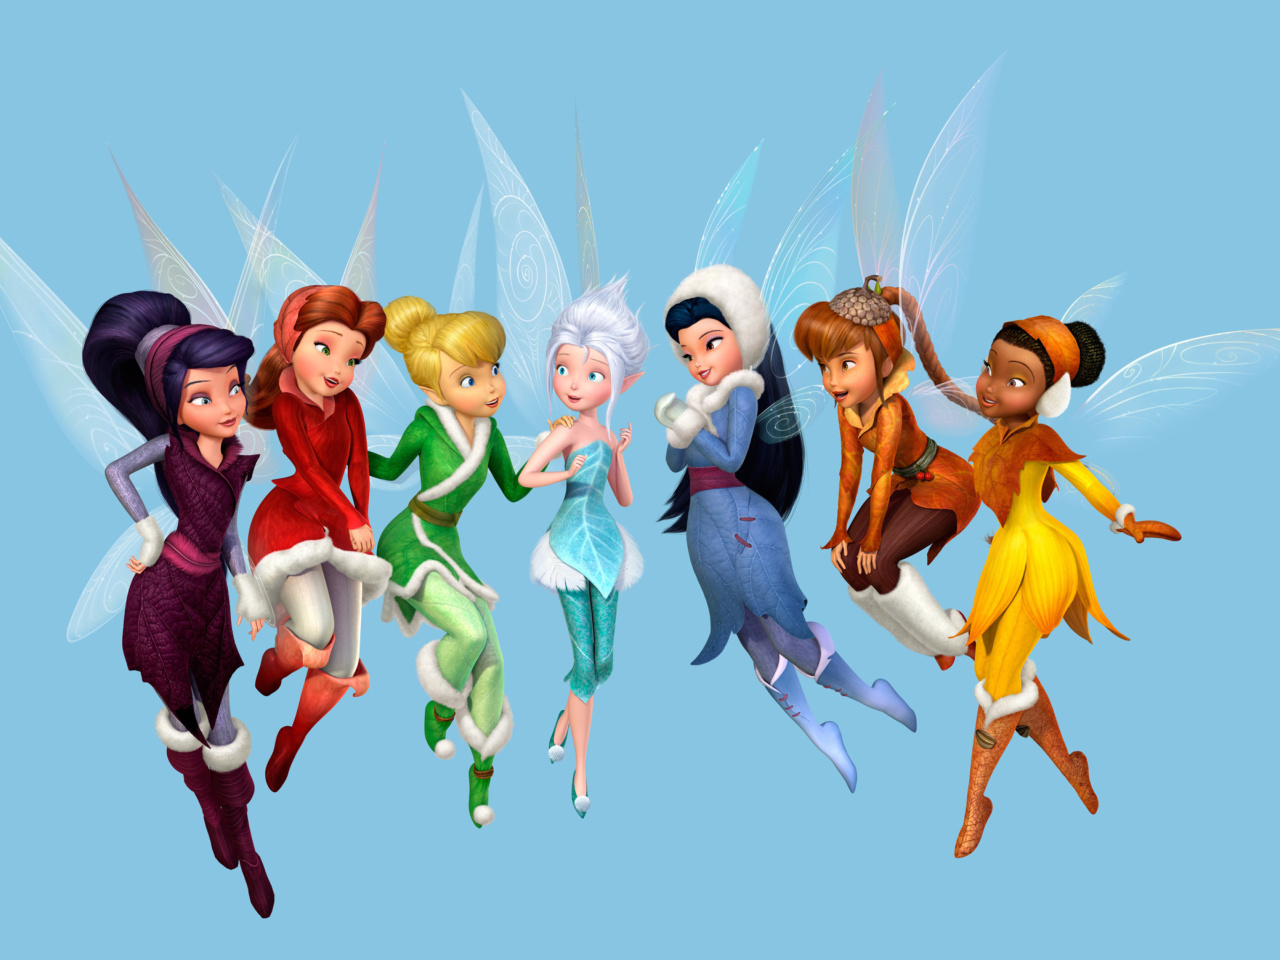 Tinkerbell and the Mysterious Winter Woods wallpaper 1280x960